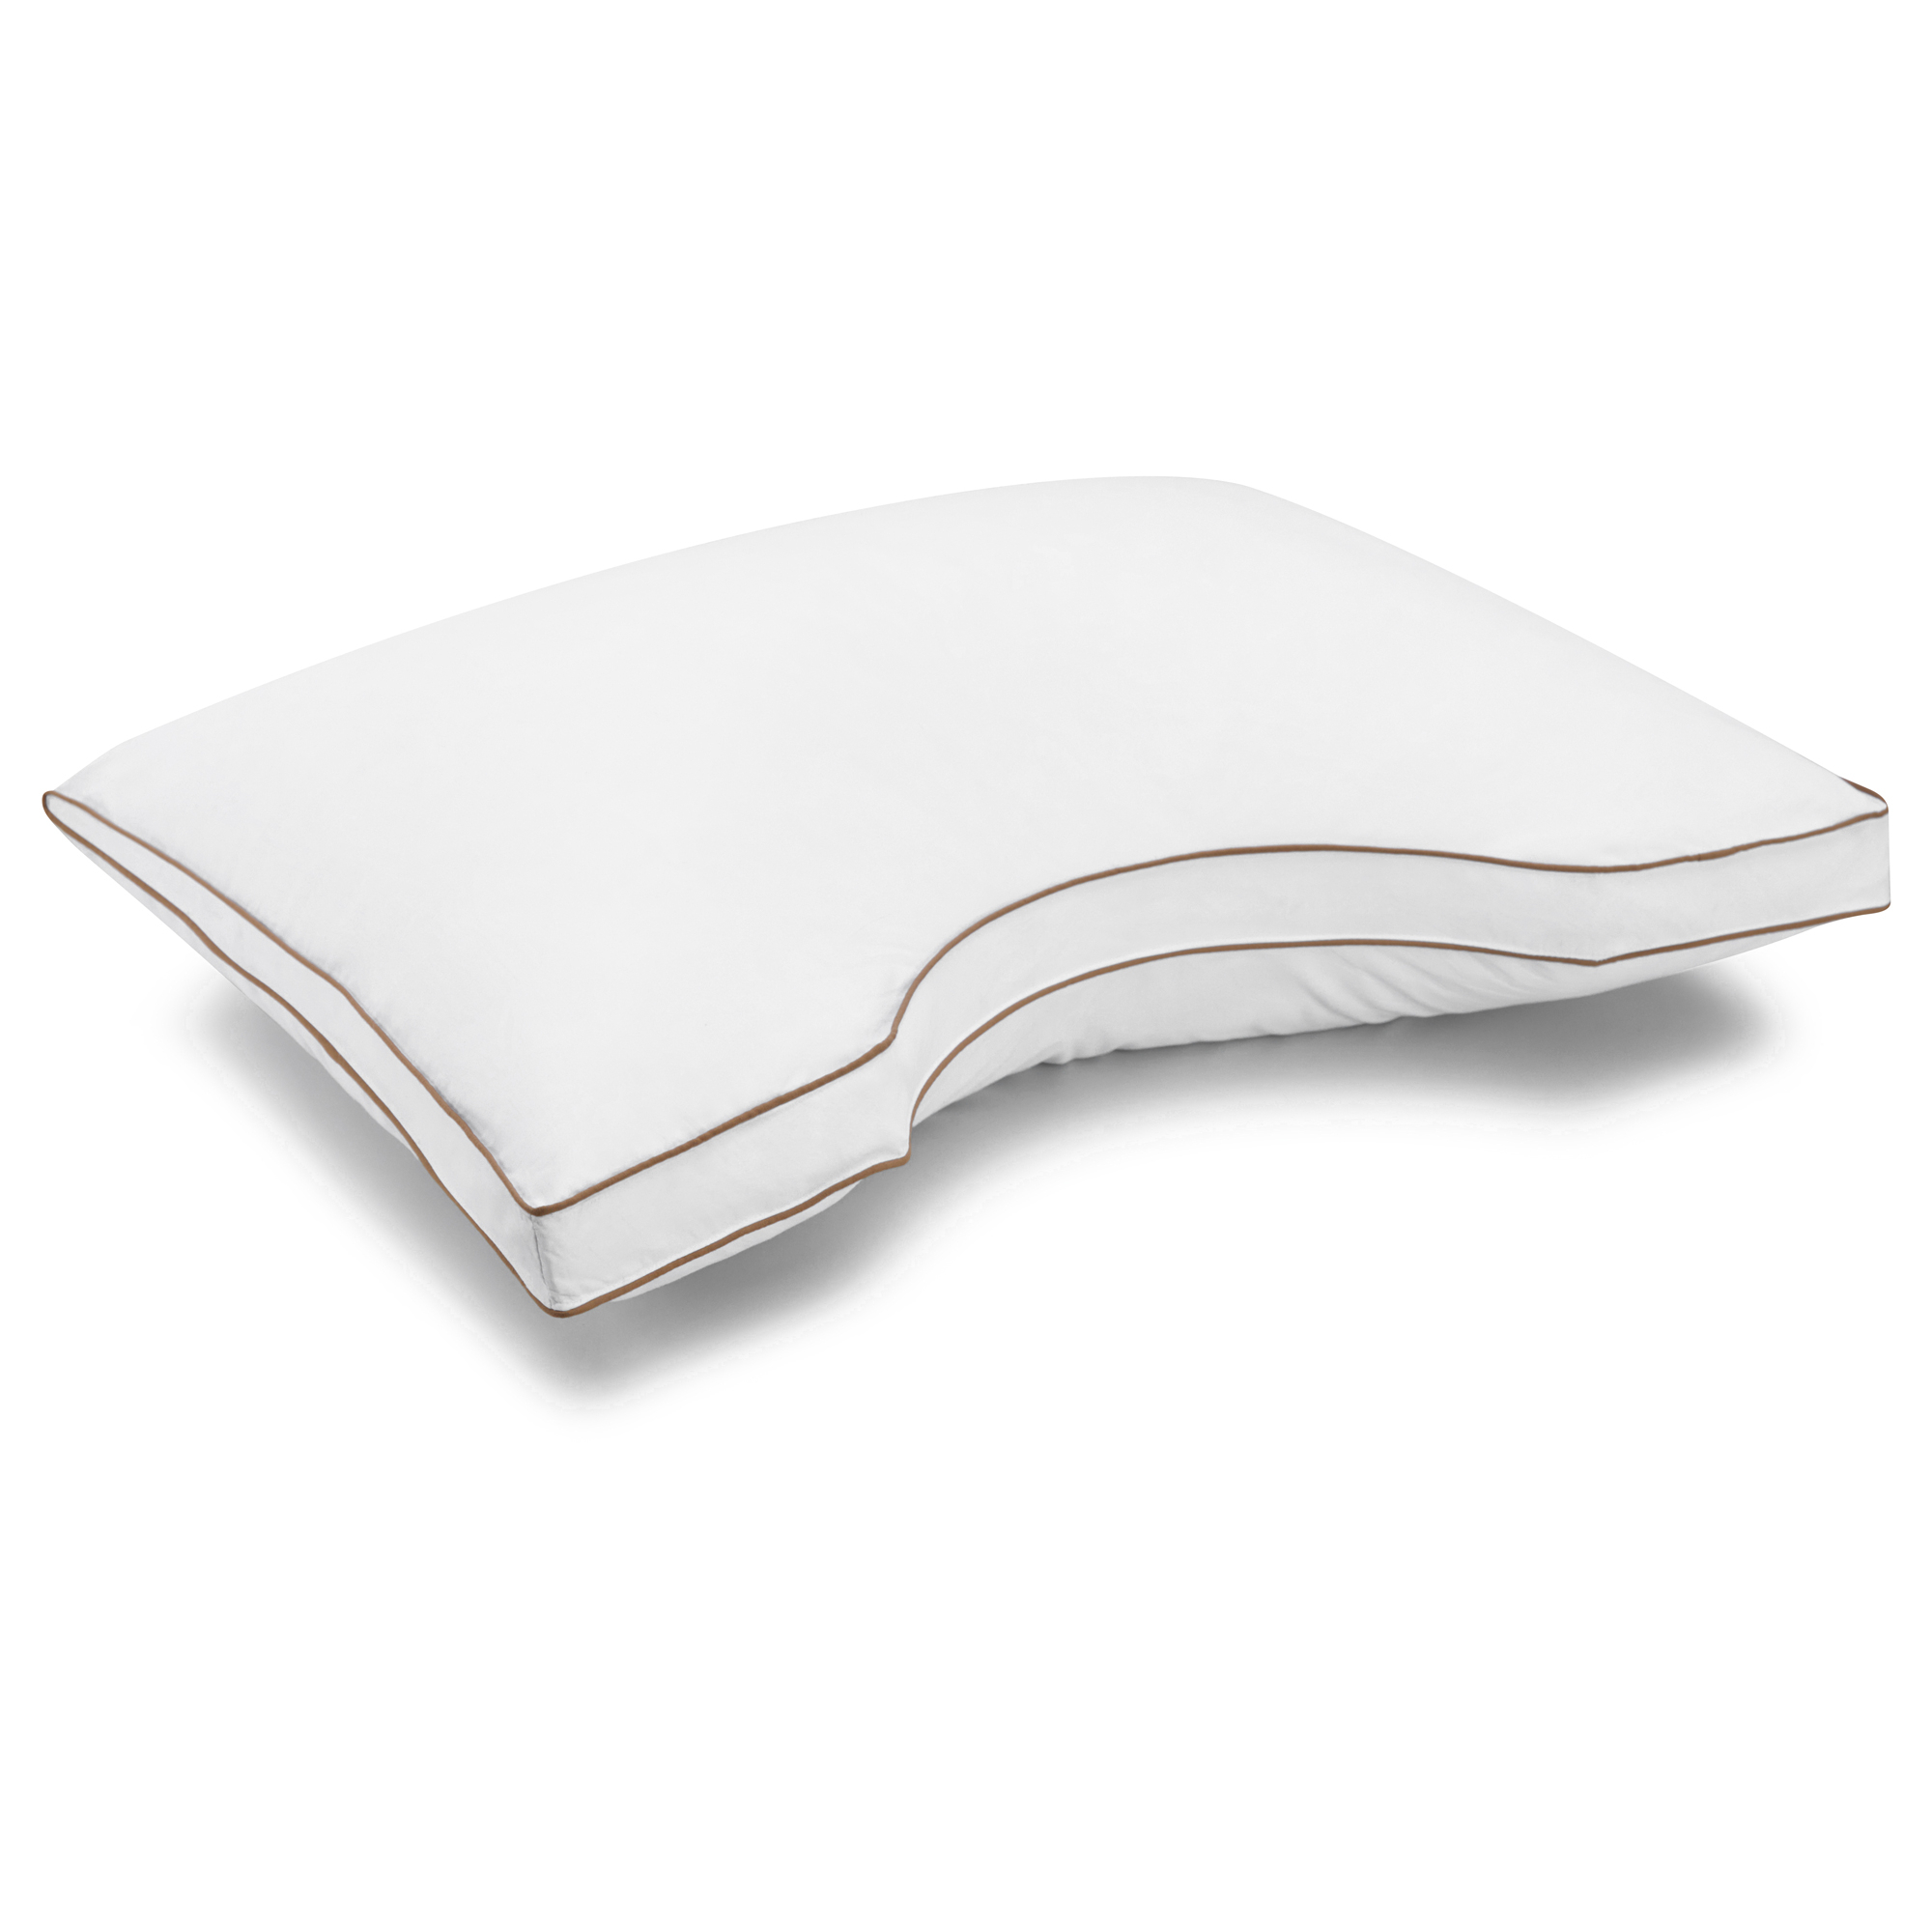 Ergonomic Contoured Curve Pillow for Neck and Shoulder Support